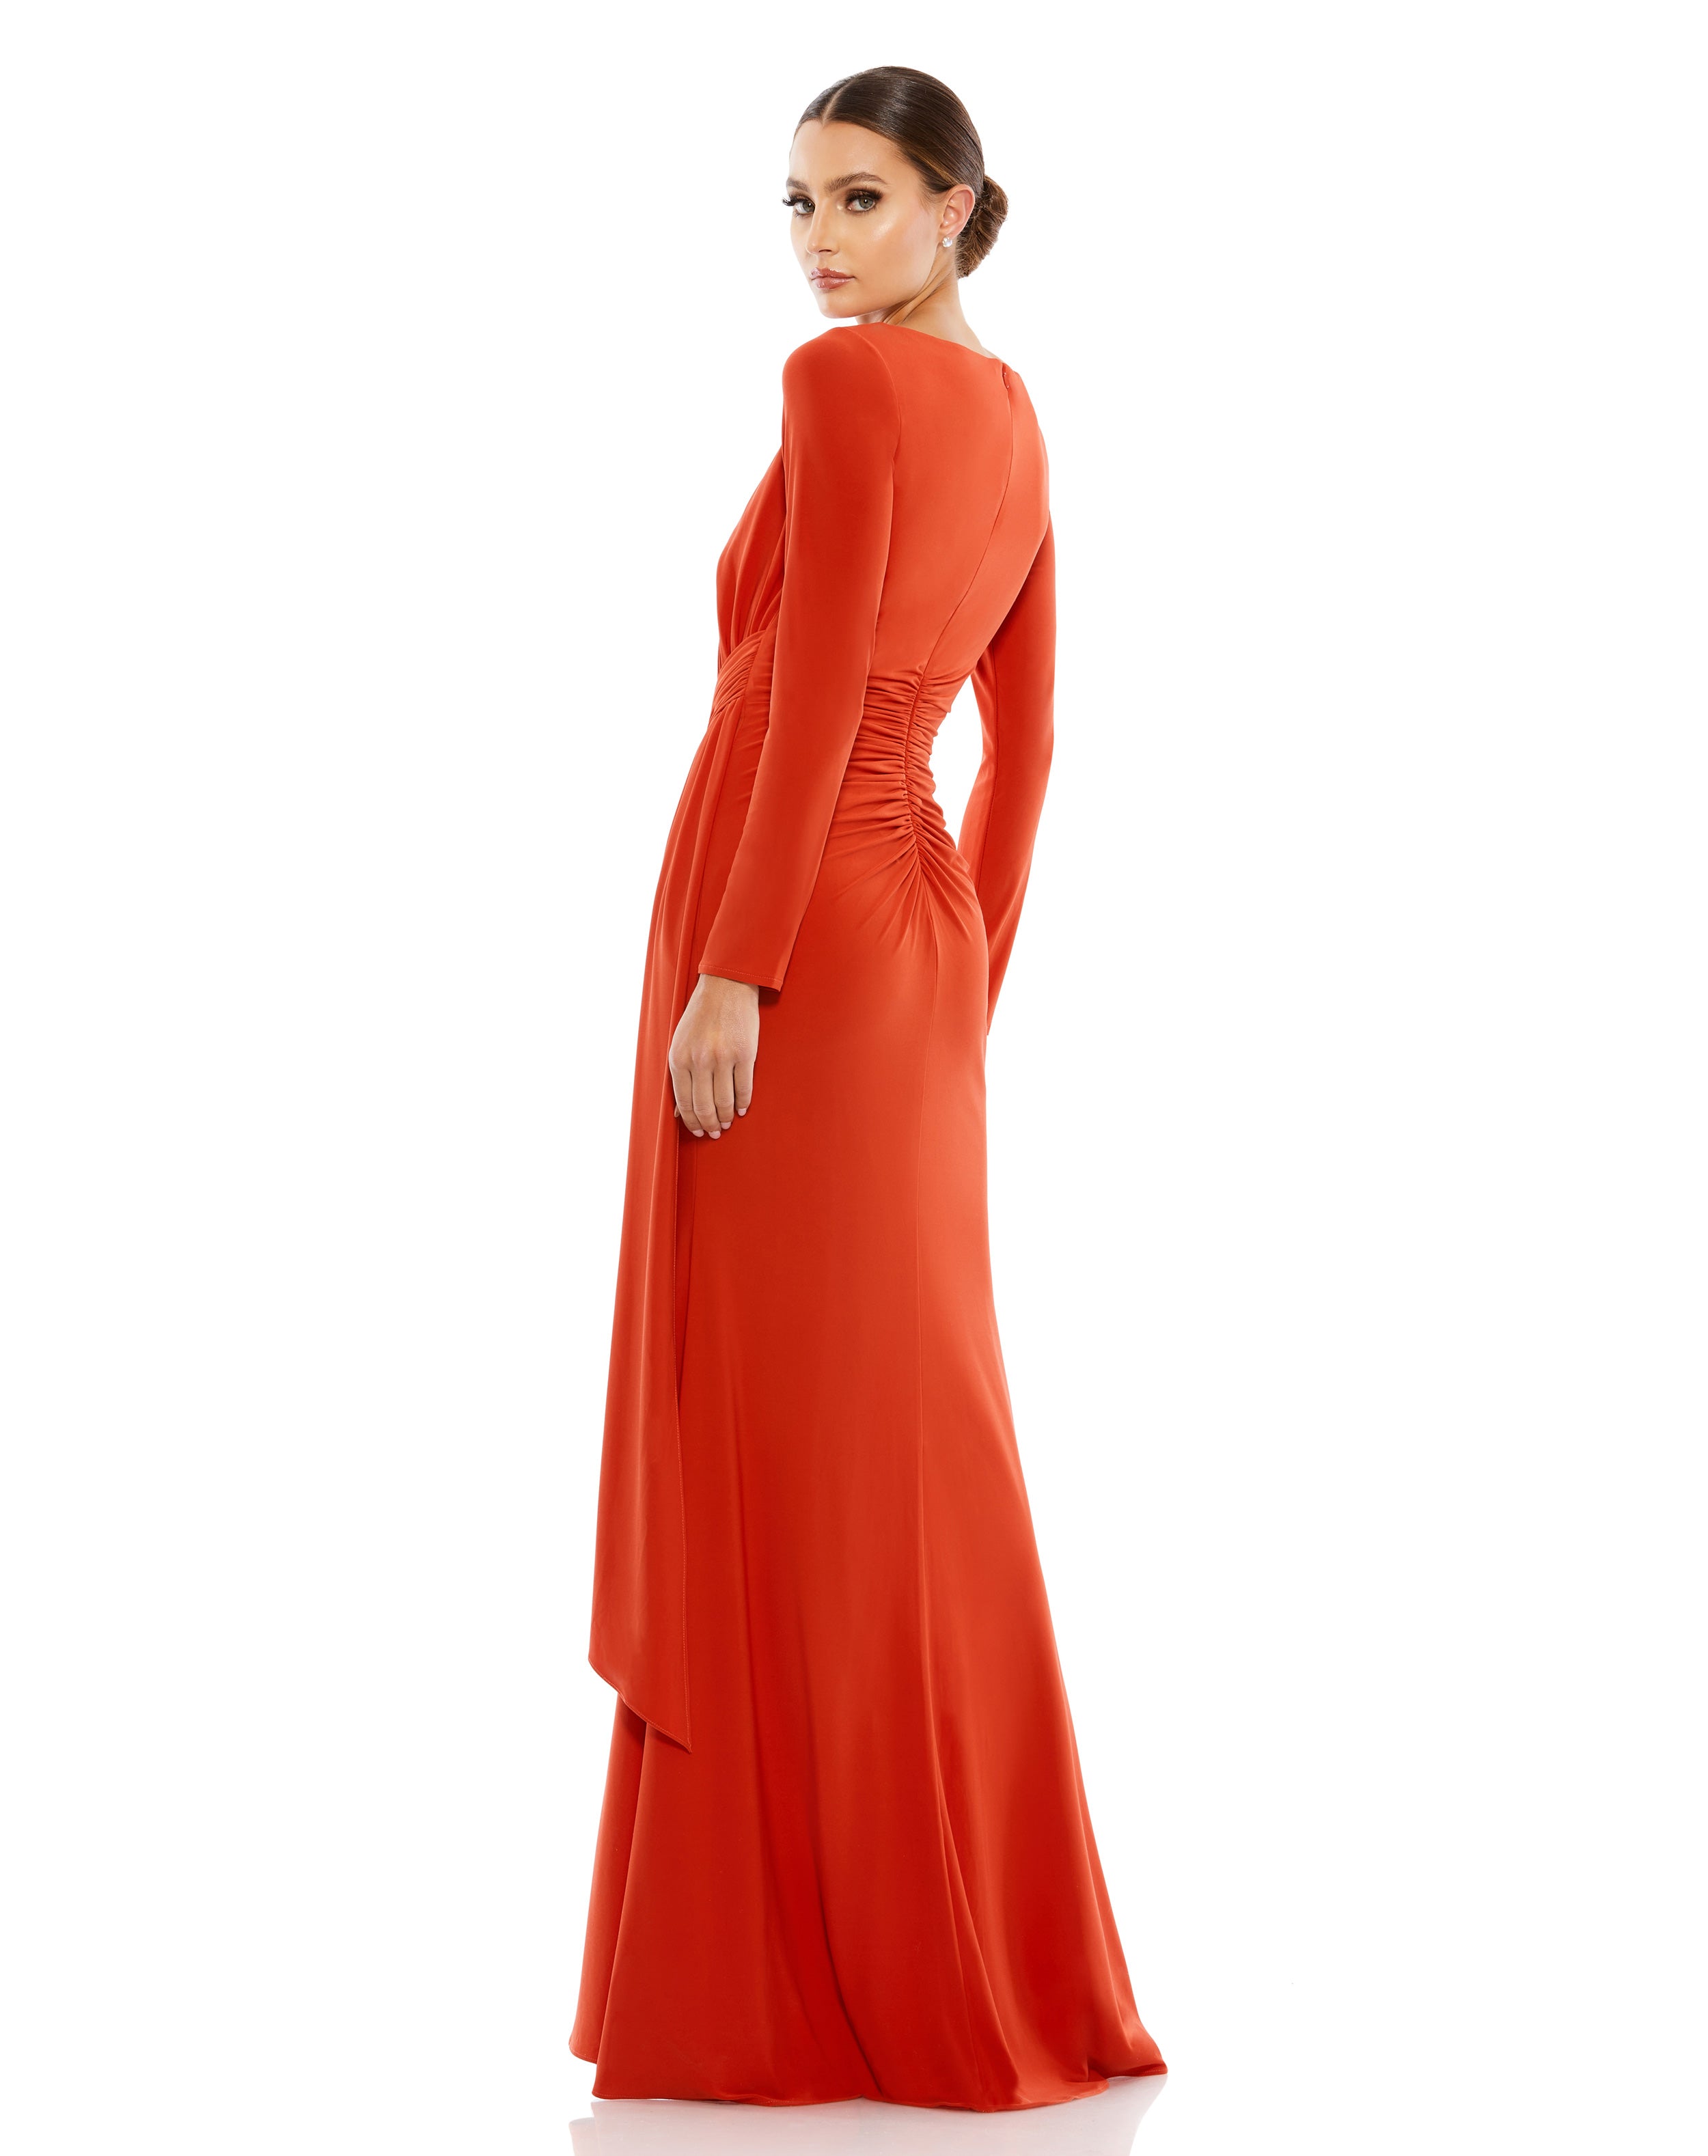 Ruched Long Sleeve Cowl Neck Gown